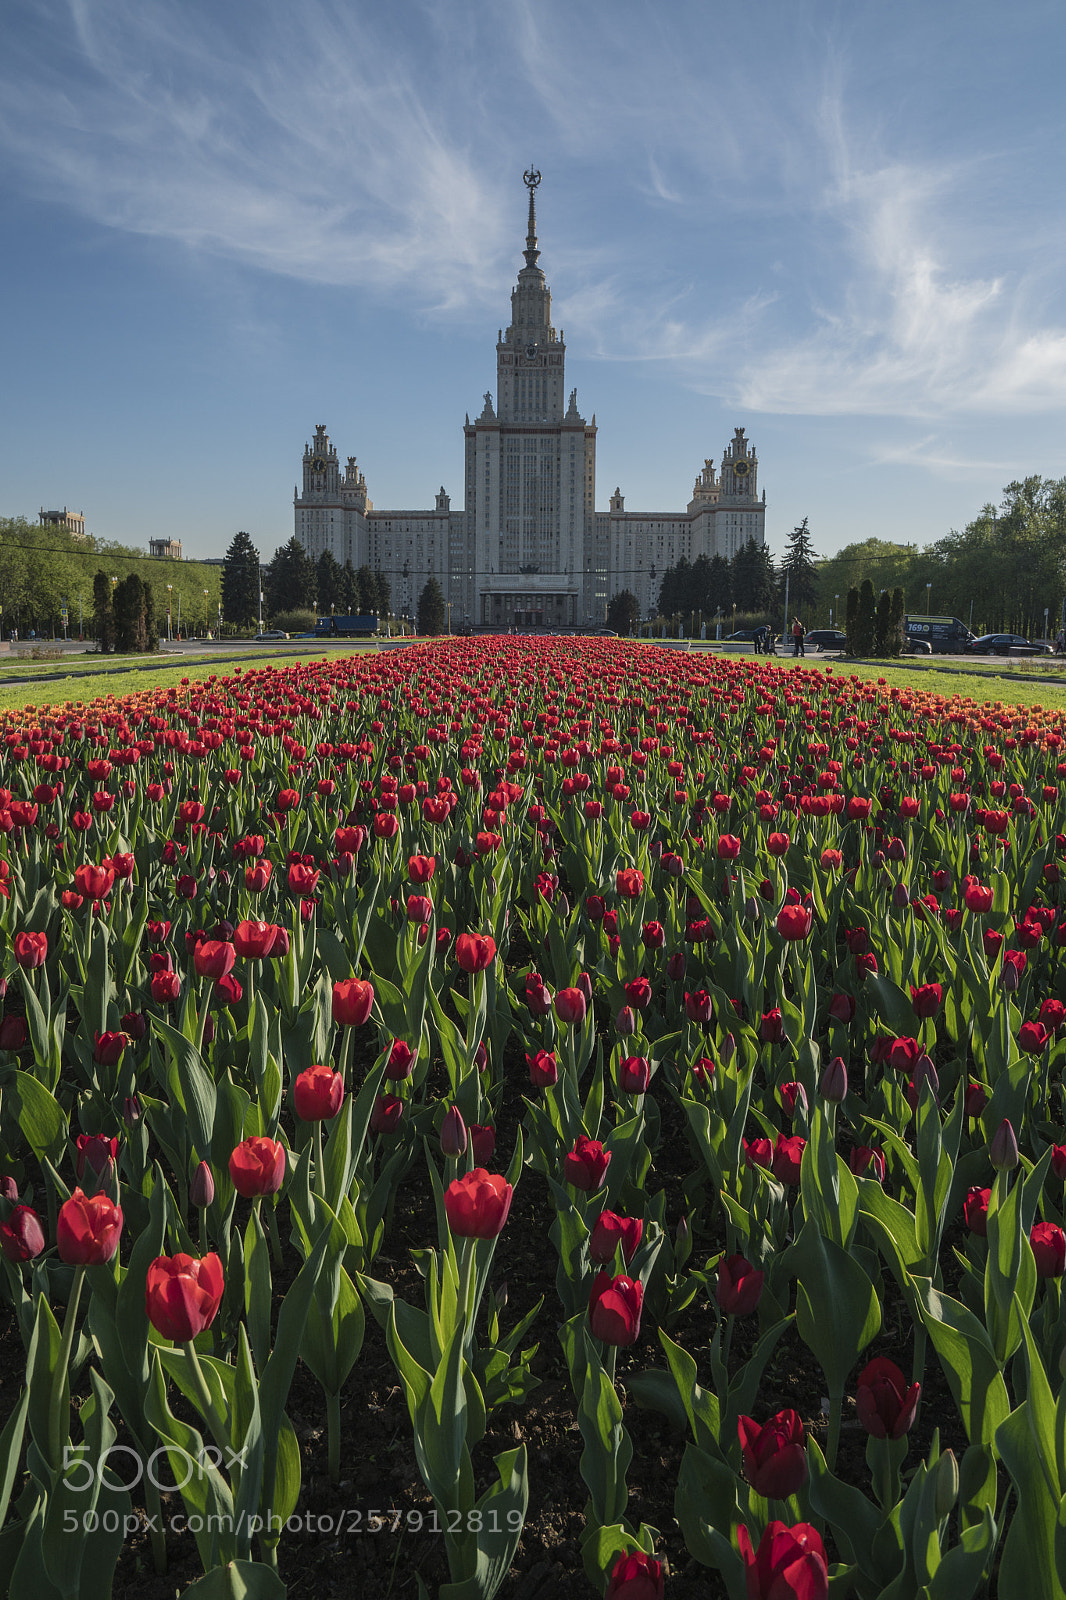 Sony a6300 sample photo. Moscow state university photography